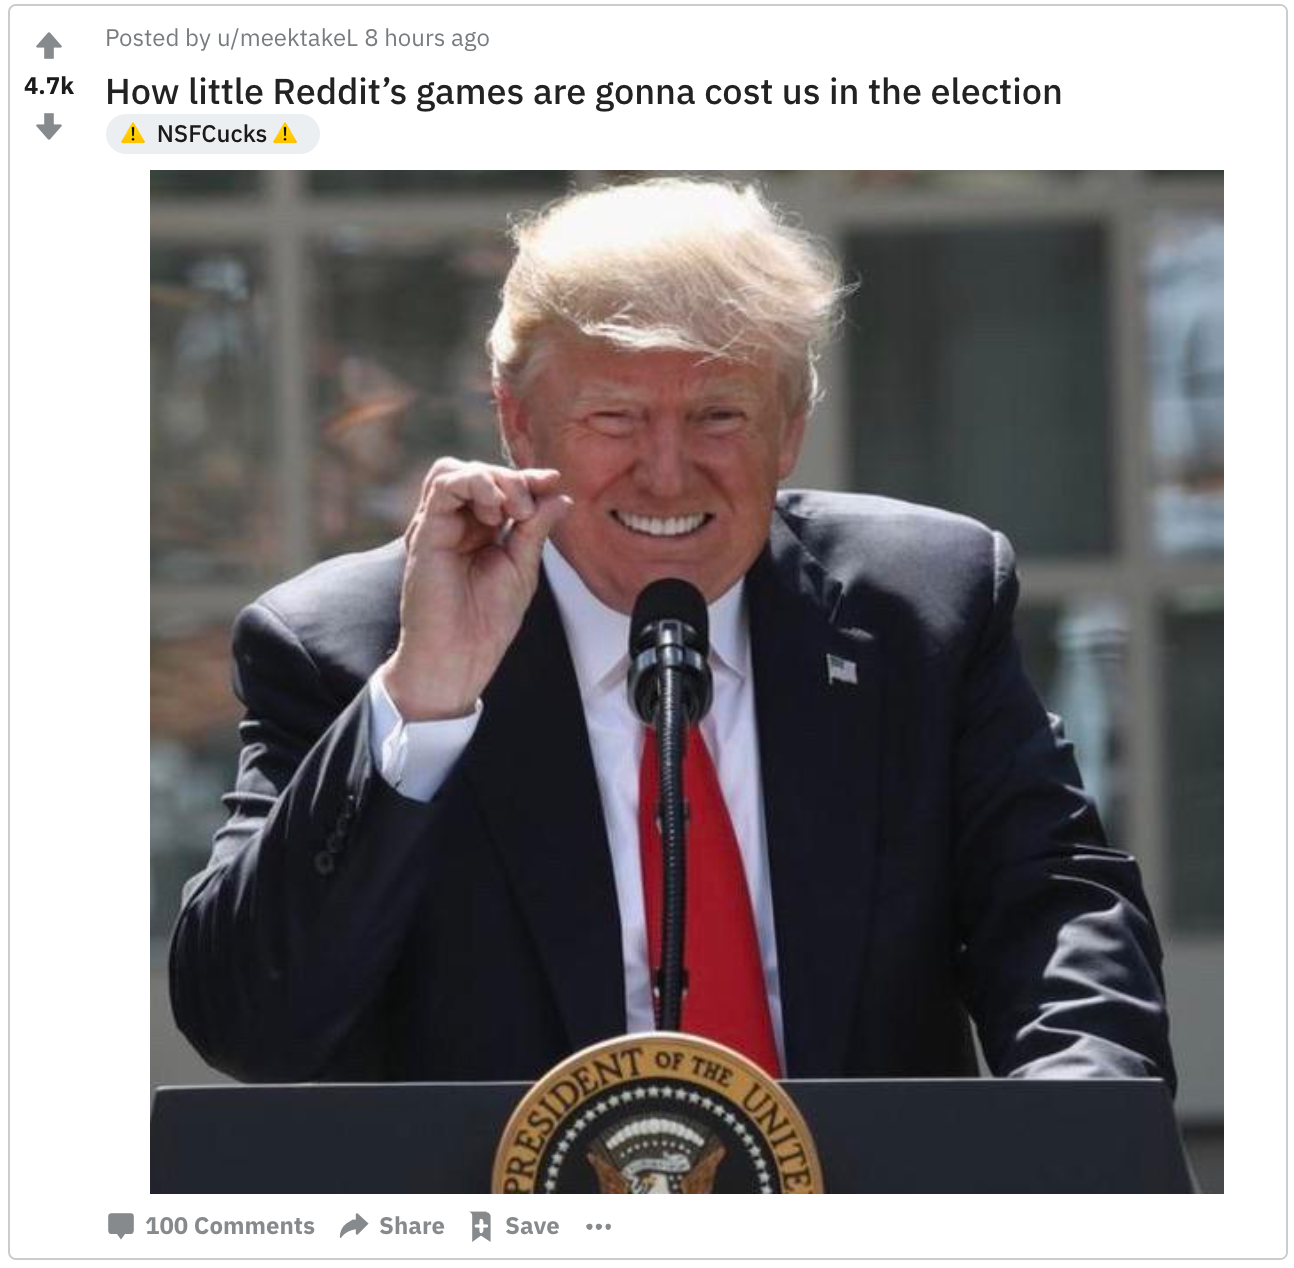 How little Reddit's games are gonna cost us in the election